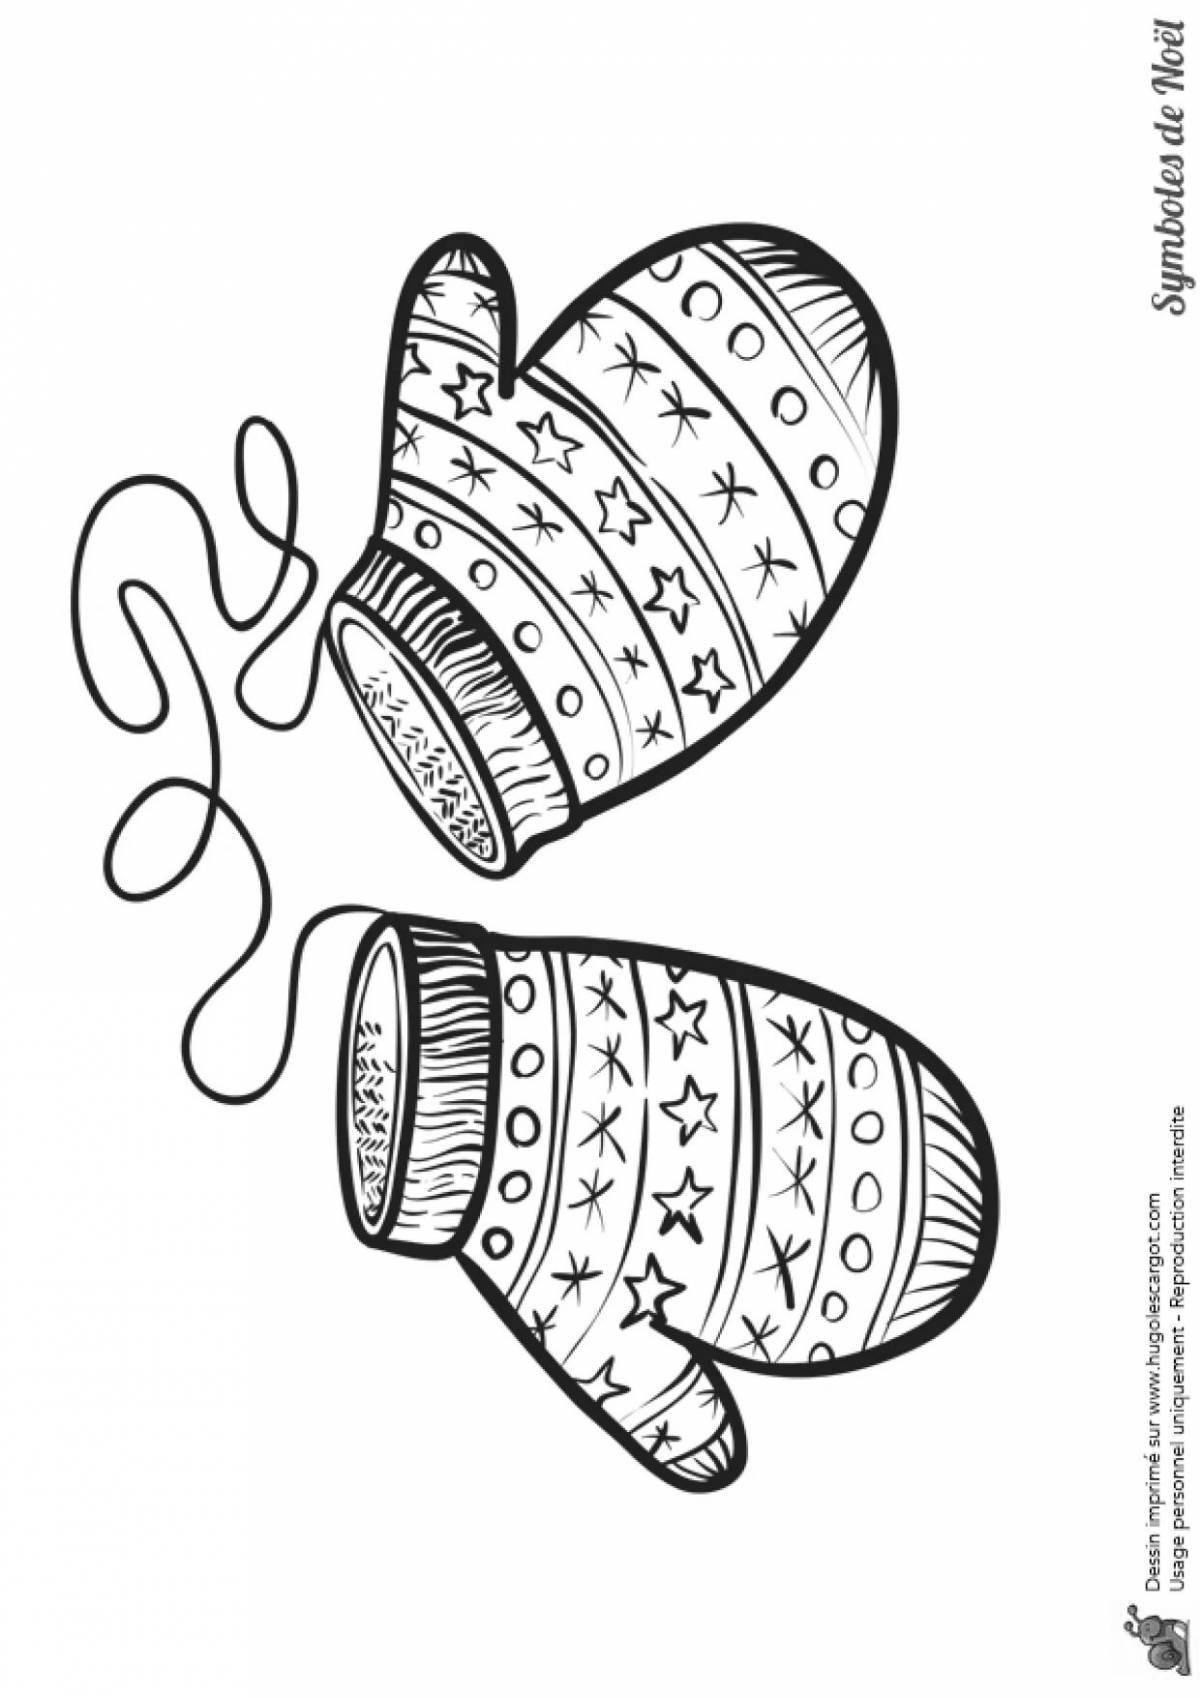 Coloring page inviting mitten with a pattern